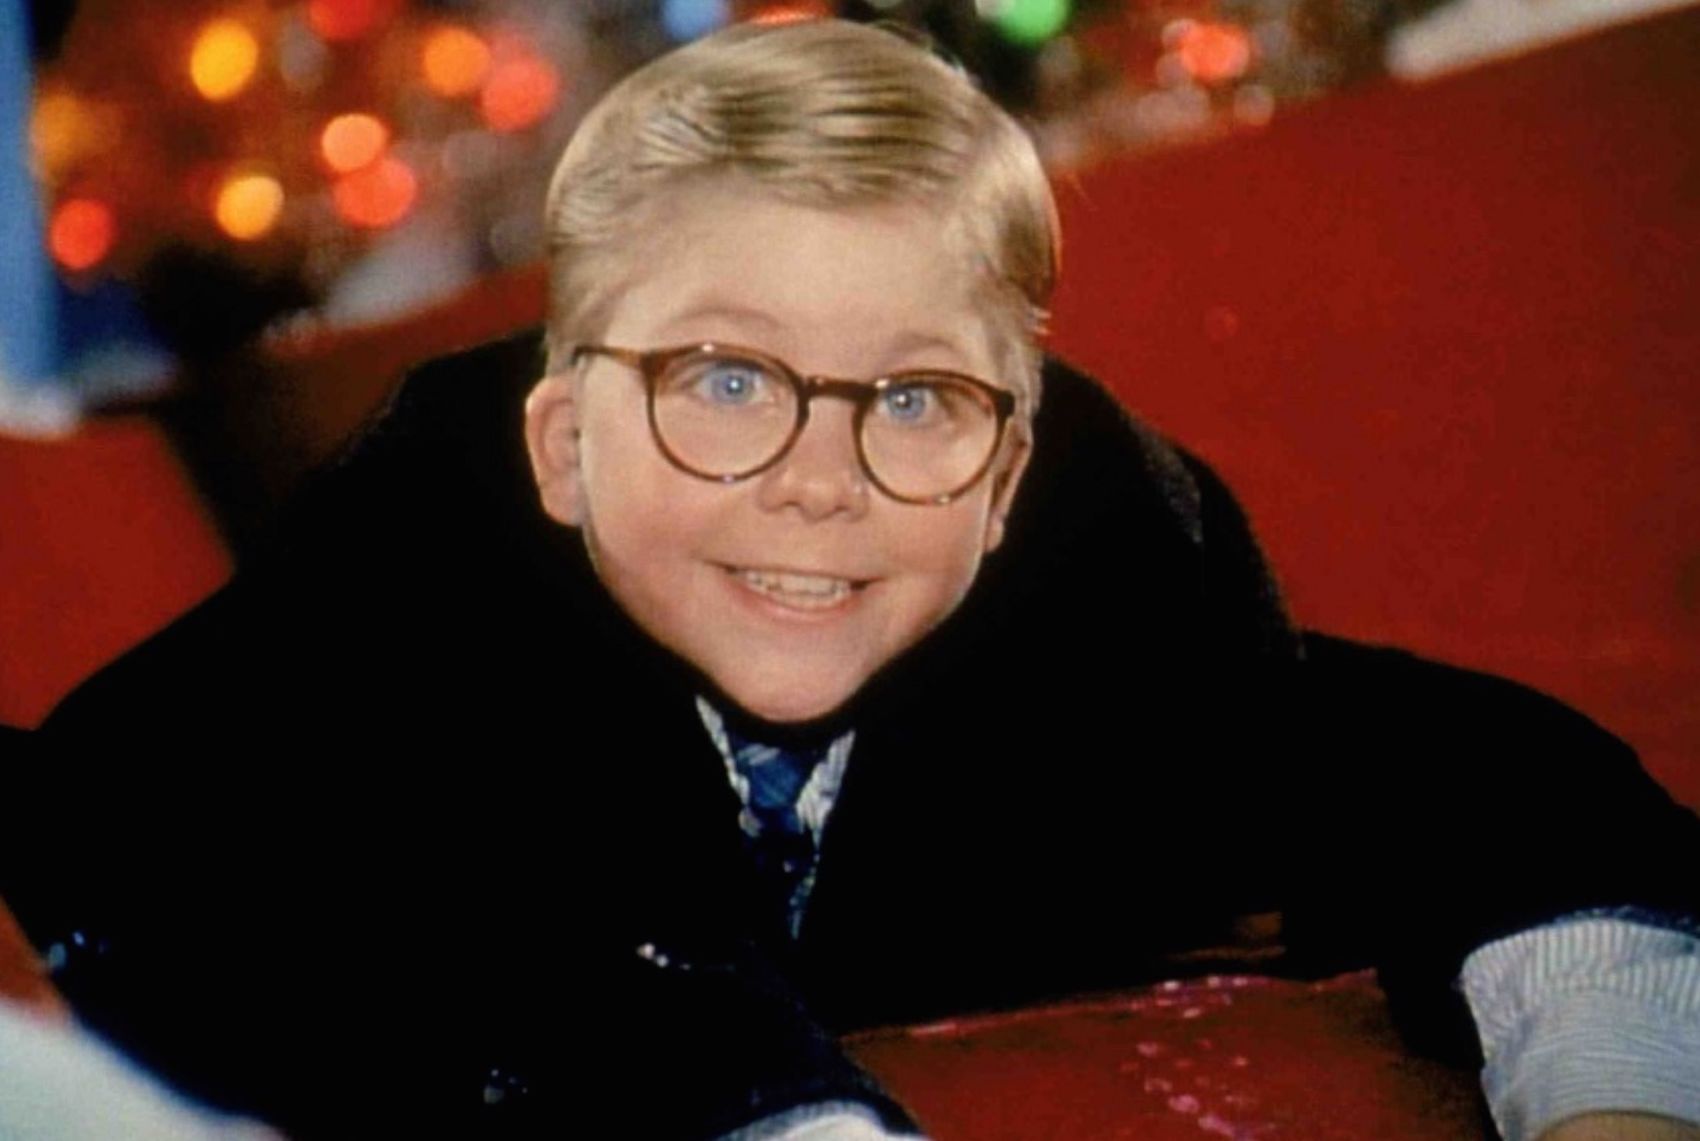 10 Classic Christmas Movies and Where to Stream Them